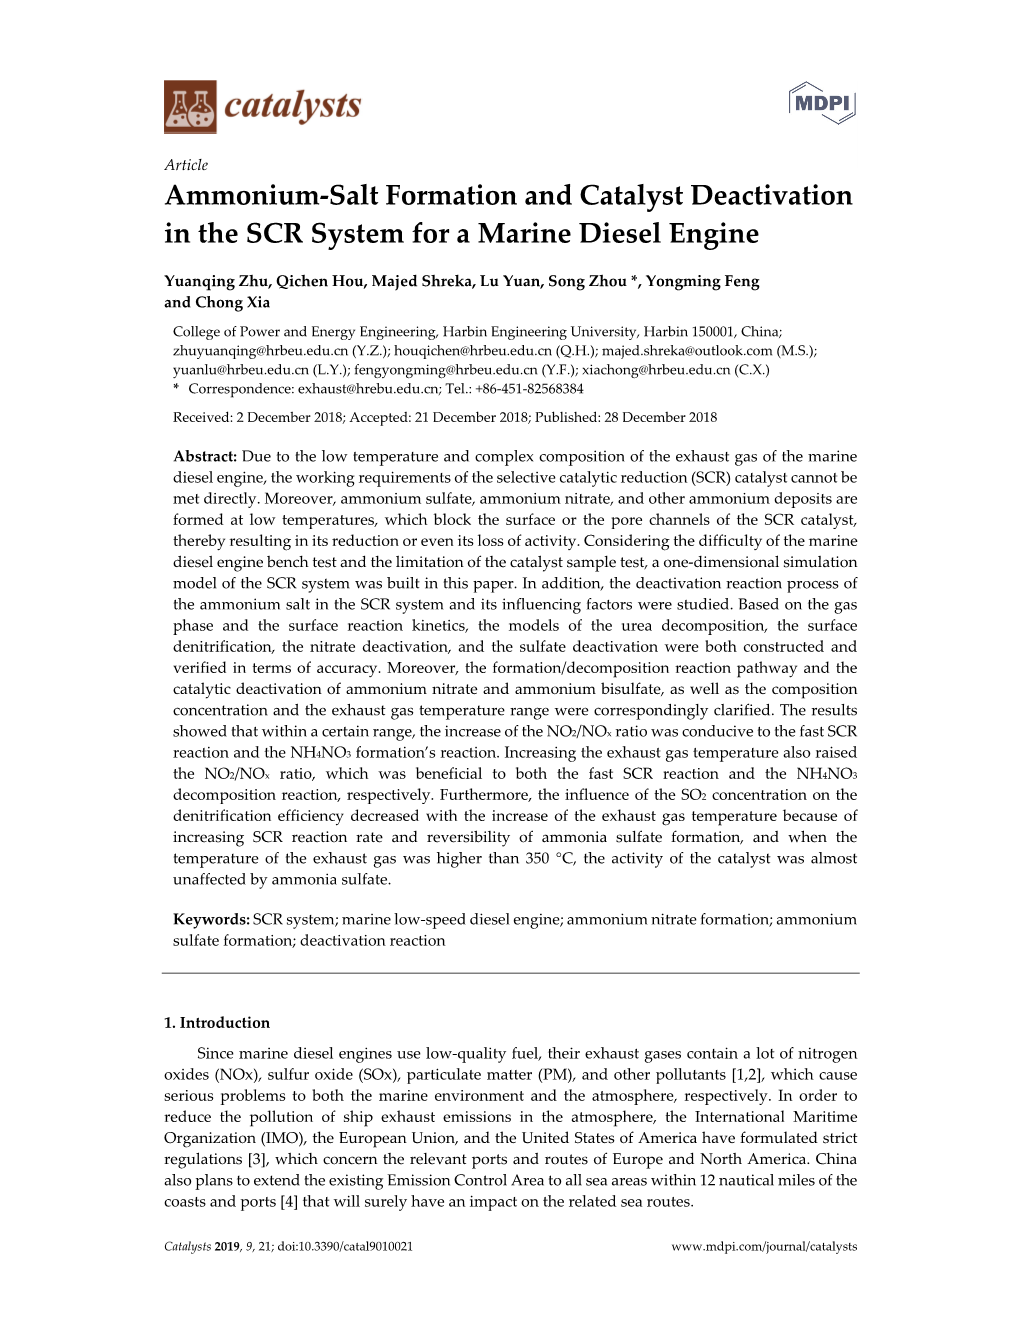 Ammonium-Salt Formation and Catalyst Deactivation in the SCR System for a Marine Diesel Engine